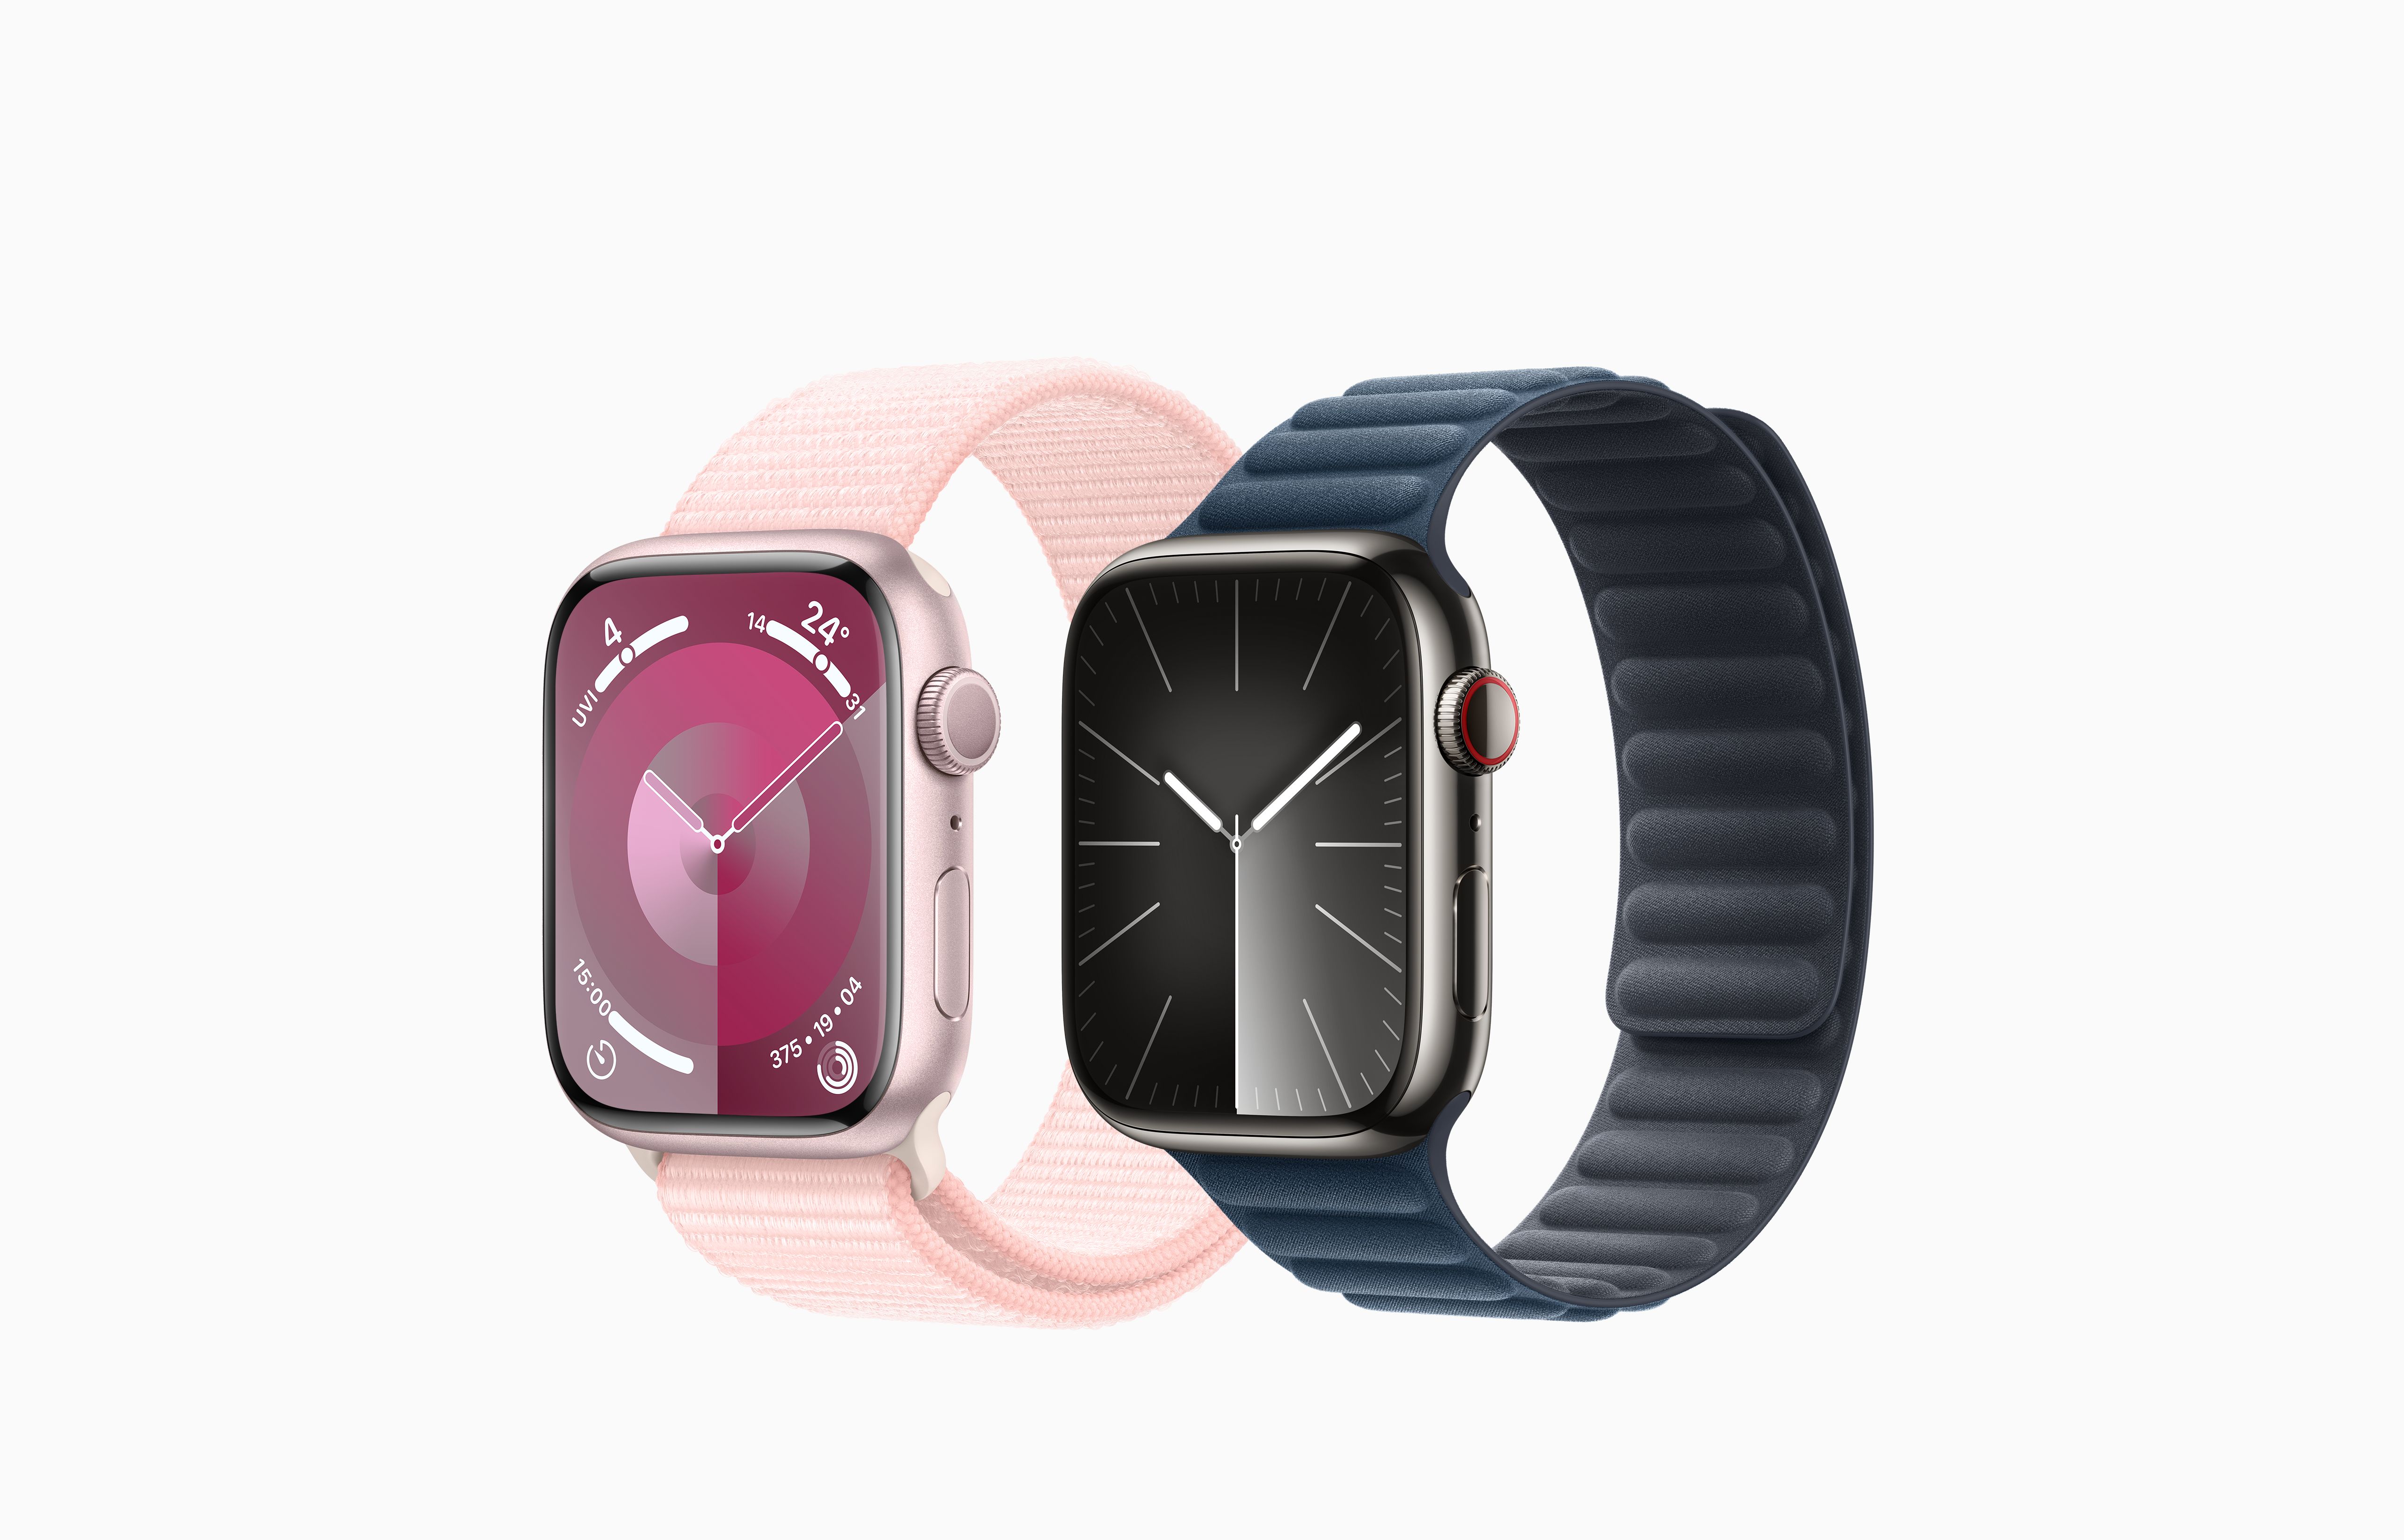 Side-by-side comparison of Apple Watch models, Pink Aluminium case with matt finish, Graphite (dark grey) Stainless Steel case with shiny finish